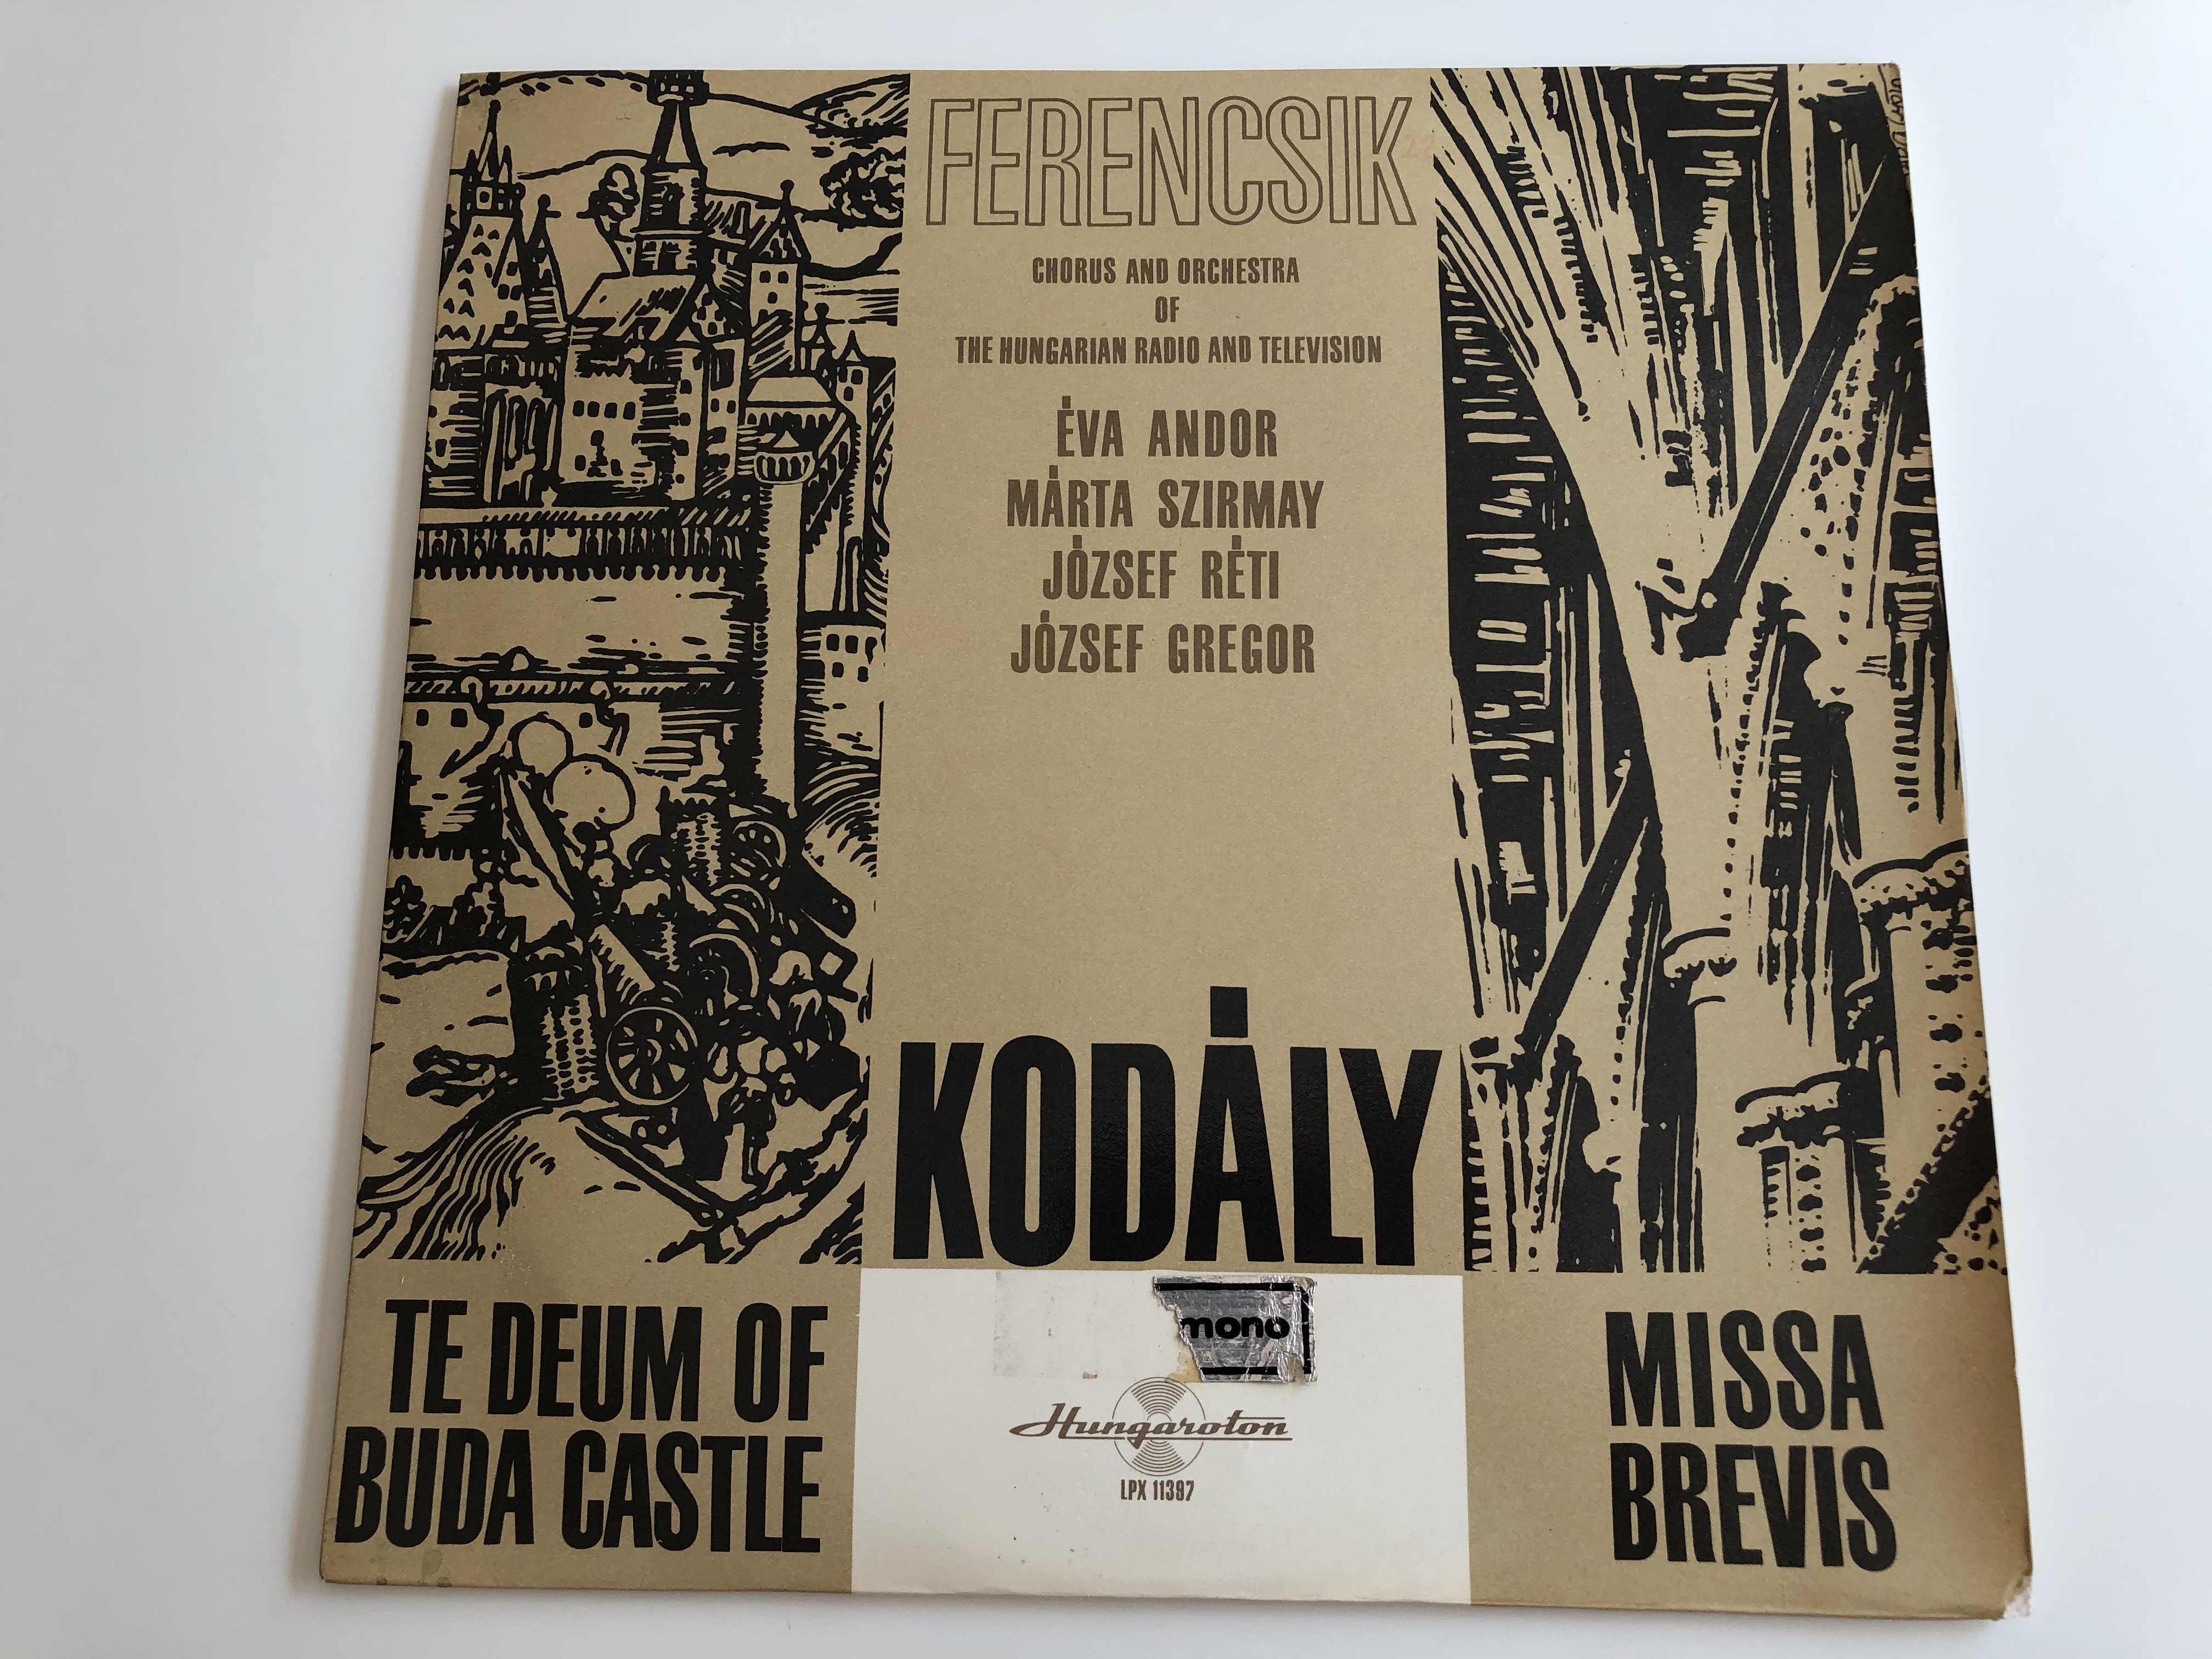 ferencsik-kod-ly-te-deum-of-buda-castle-missa-brevis-chorus-and-orchestra-of-the-hungarian-radio-and-television-hungaroton-lp-stereo-mono-lpx-11397-1-.jpg